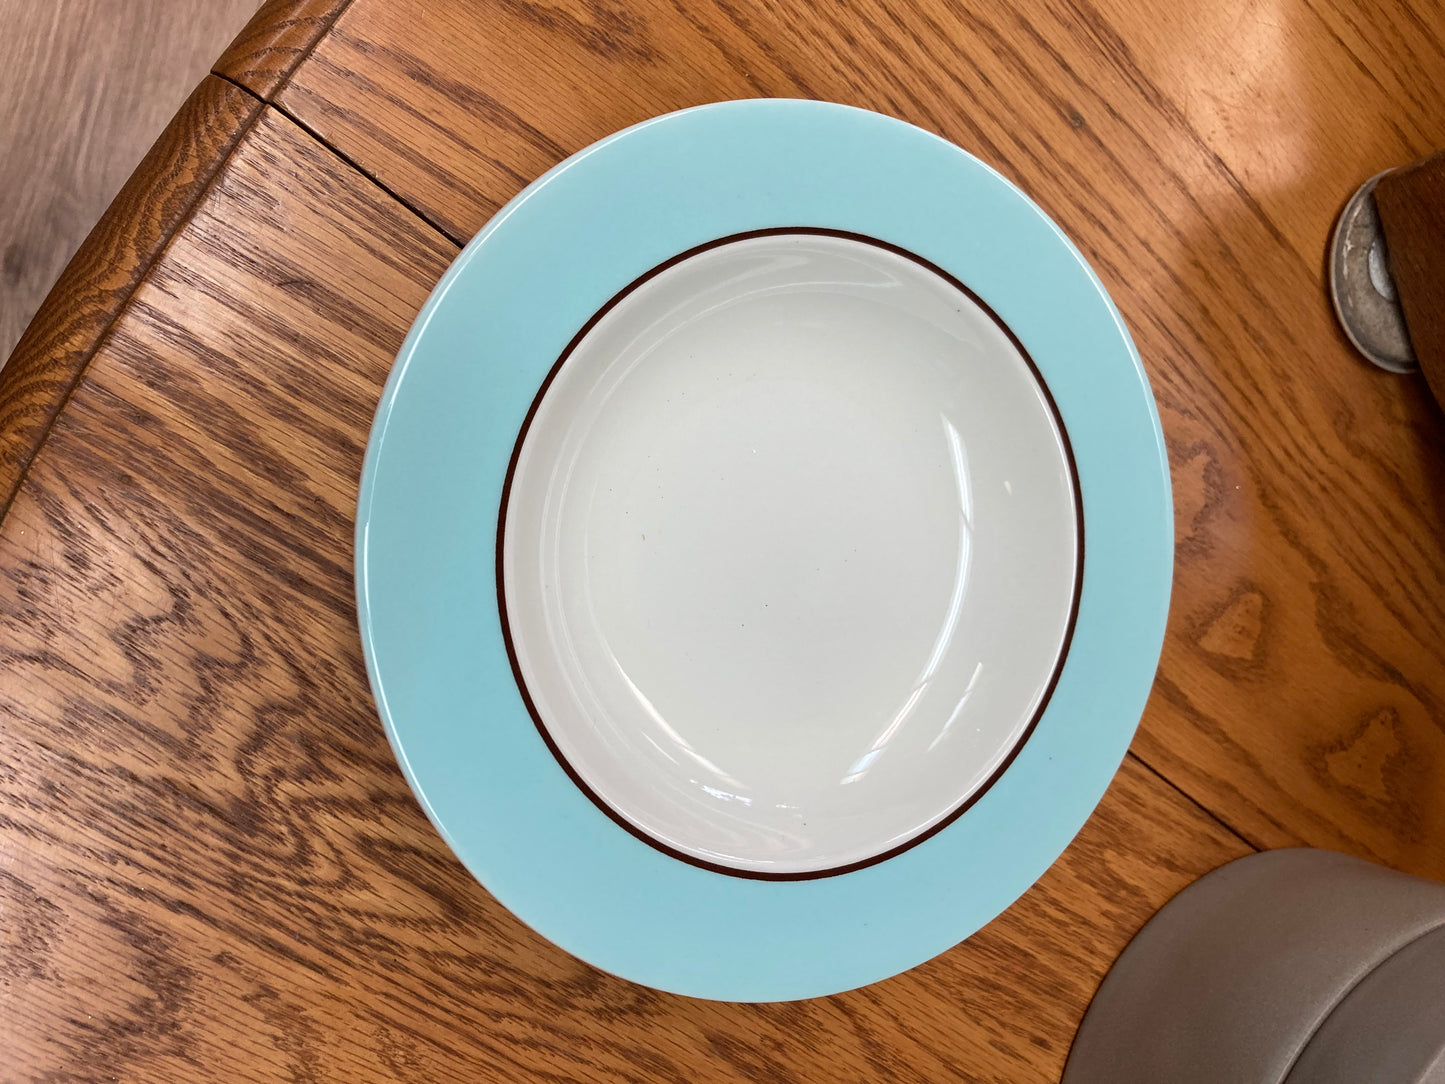 Pagnossin Ironstone AUDREY 8.5" Rim Soup Bowls, Robin's Egg Blue Brown Band, Made in Italy, Crate & Barrel $69.95 set of 8